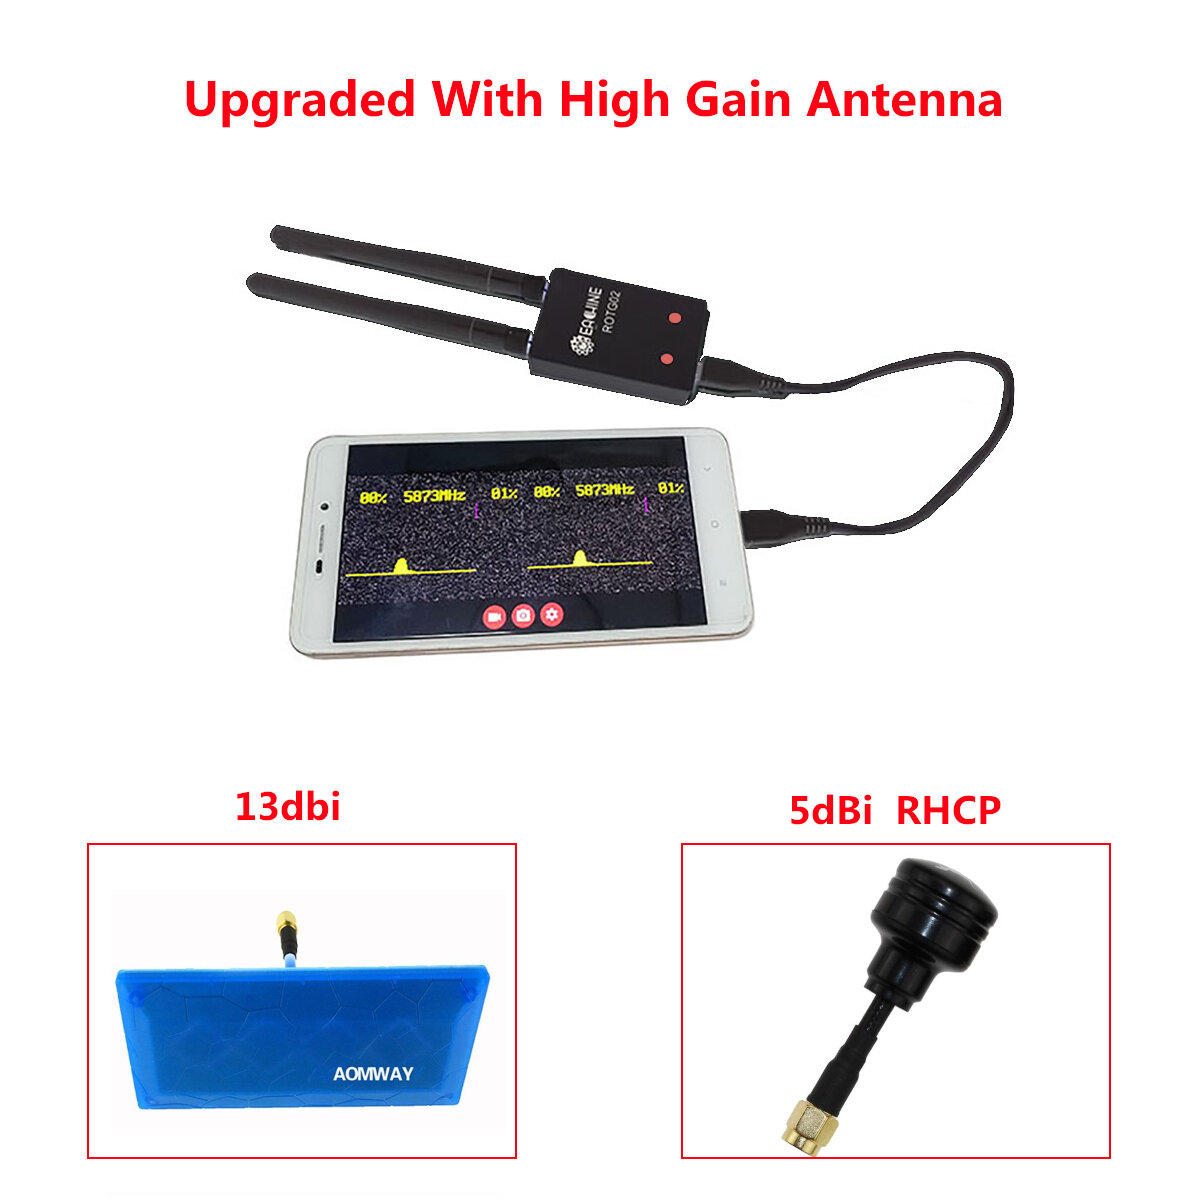 

Eachine ROTG02 UVC OTG 5.8G 150CH Diversity Audio FPV Receiver Black with RHCP High Gain Antenna for Android Tablet Smar